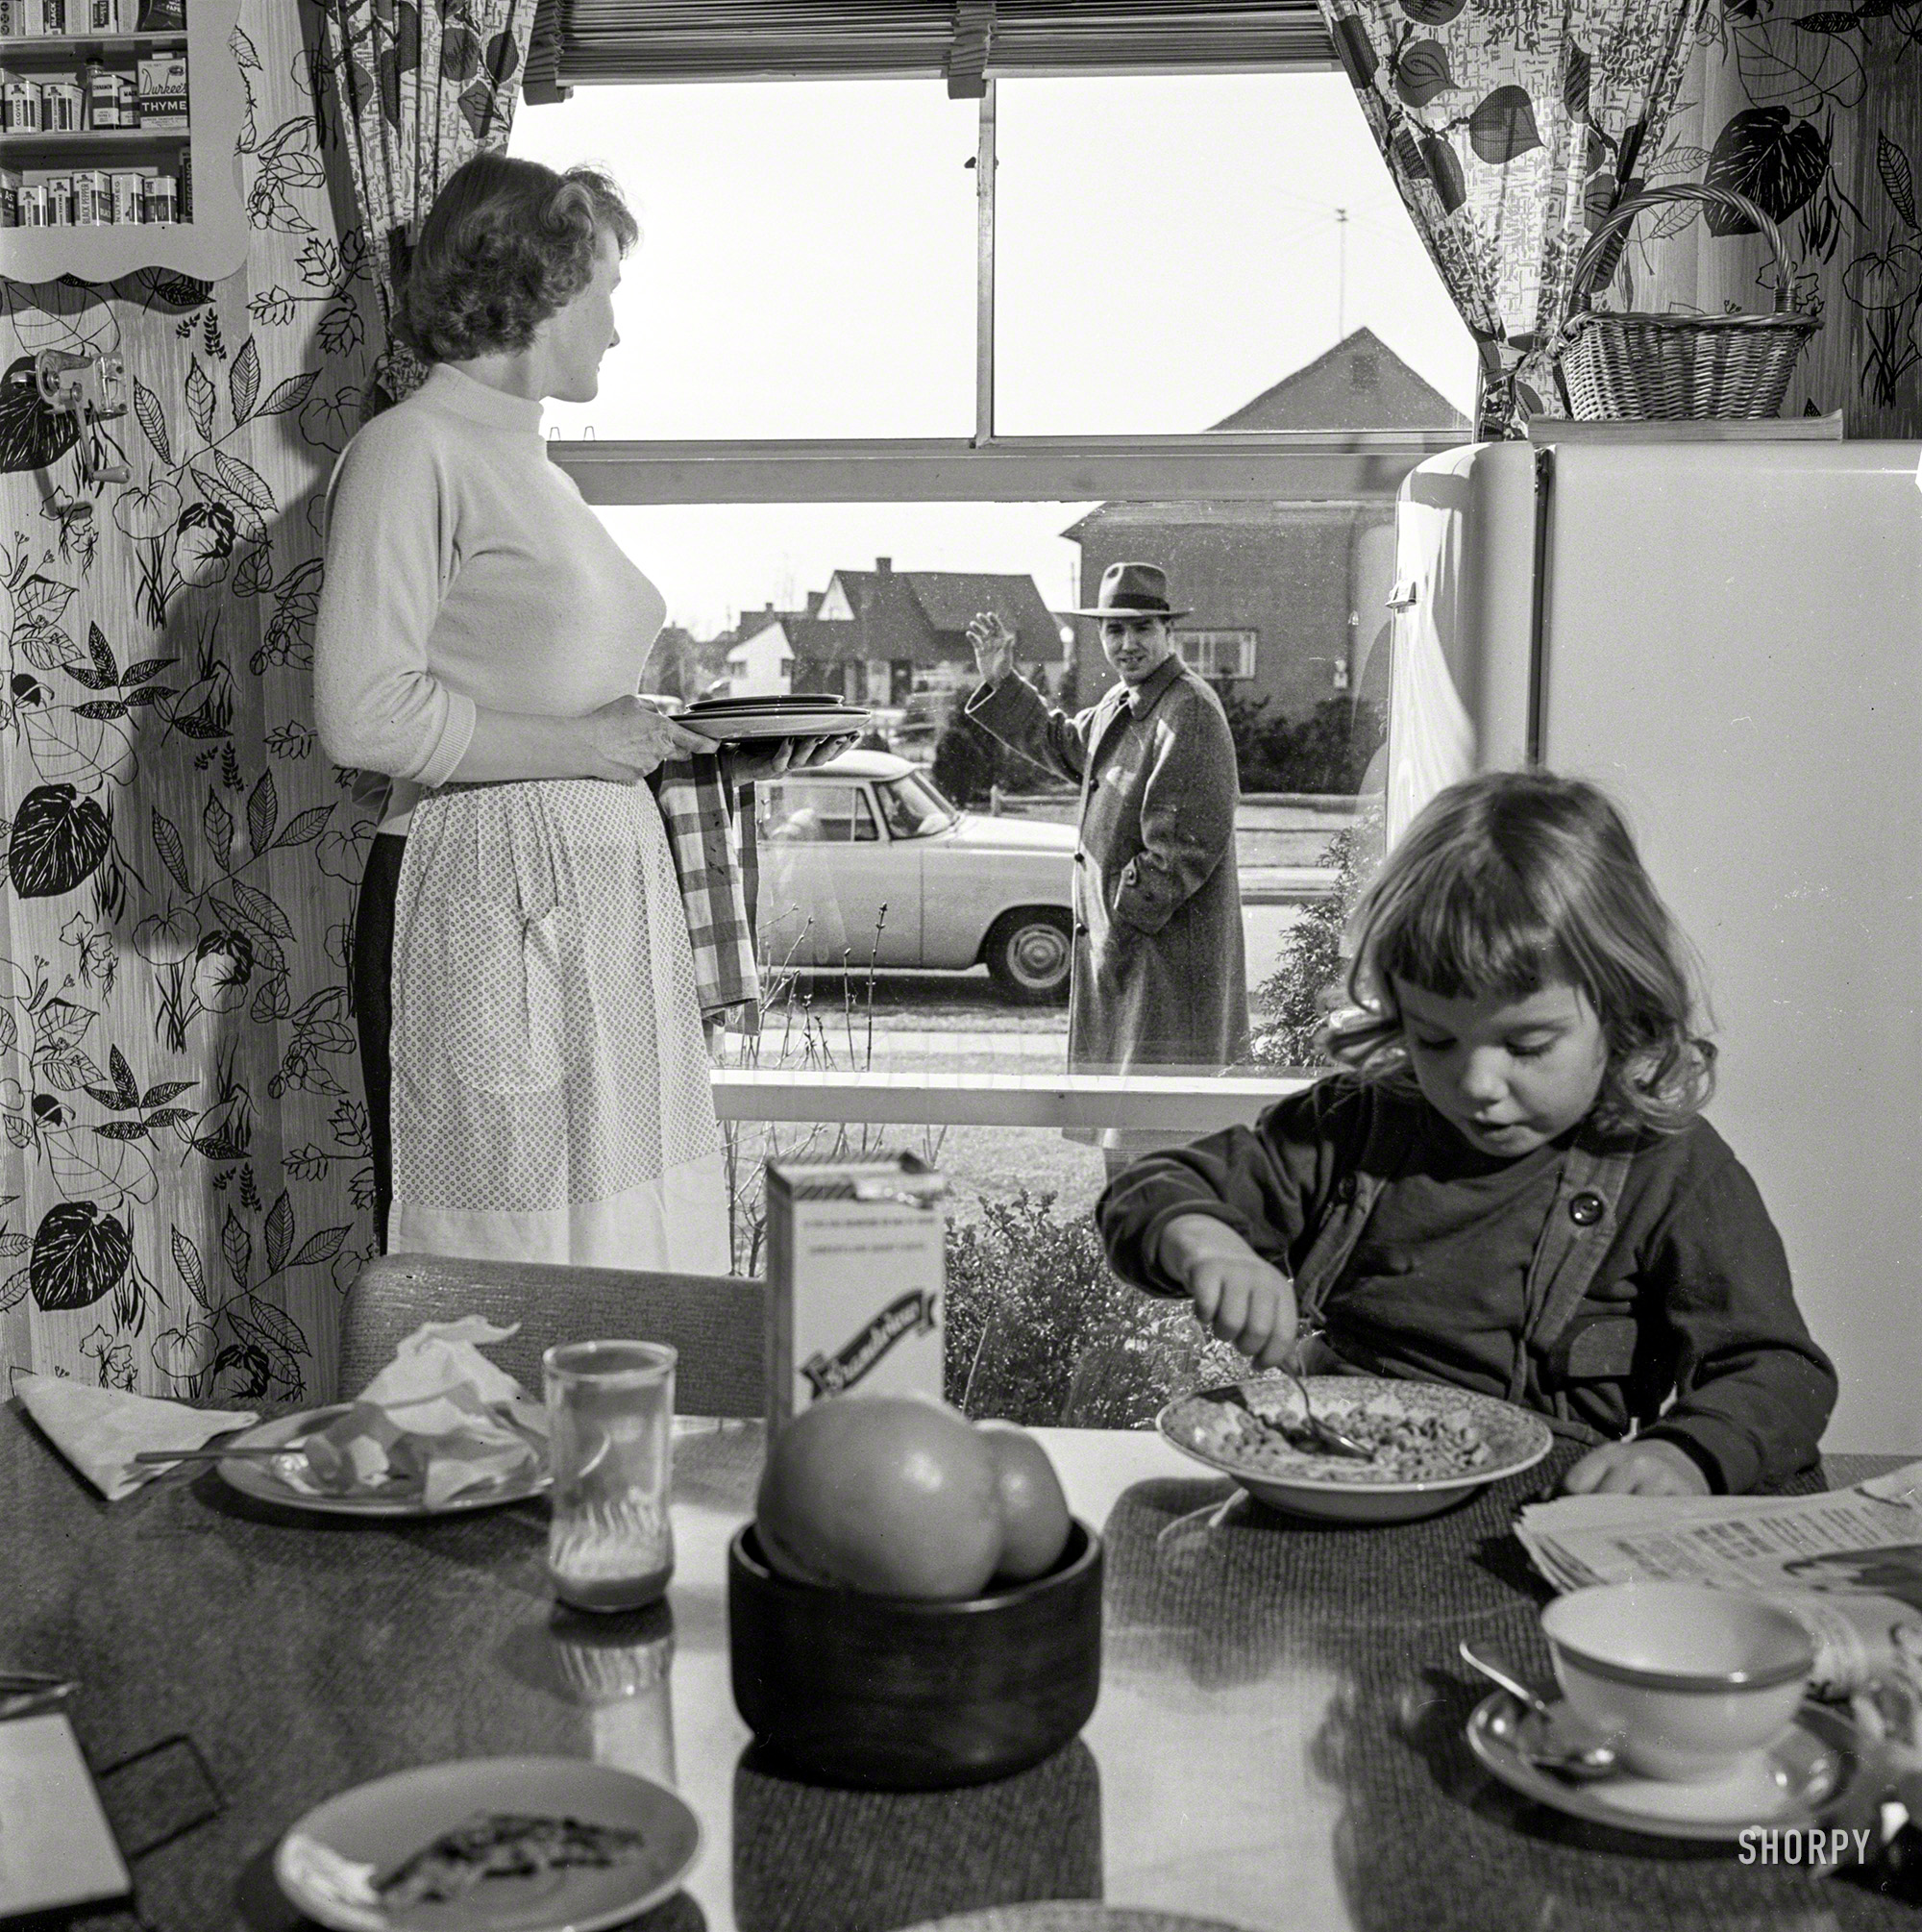 March 1955. "Men participating in family life. Includes women and children standing by window waving to men as they leave for work." Photo by Bob Lerner for the Look magazine assignment "Male Behavior." View full size.